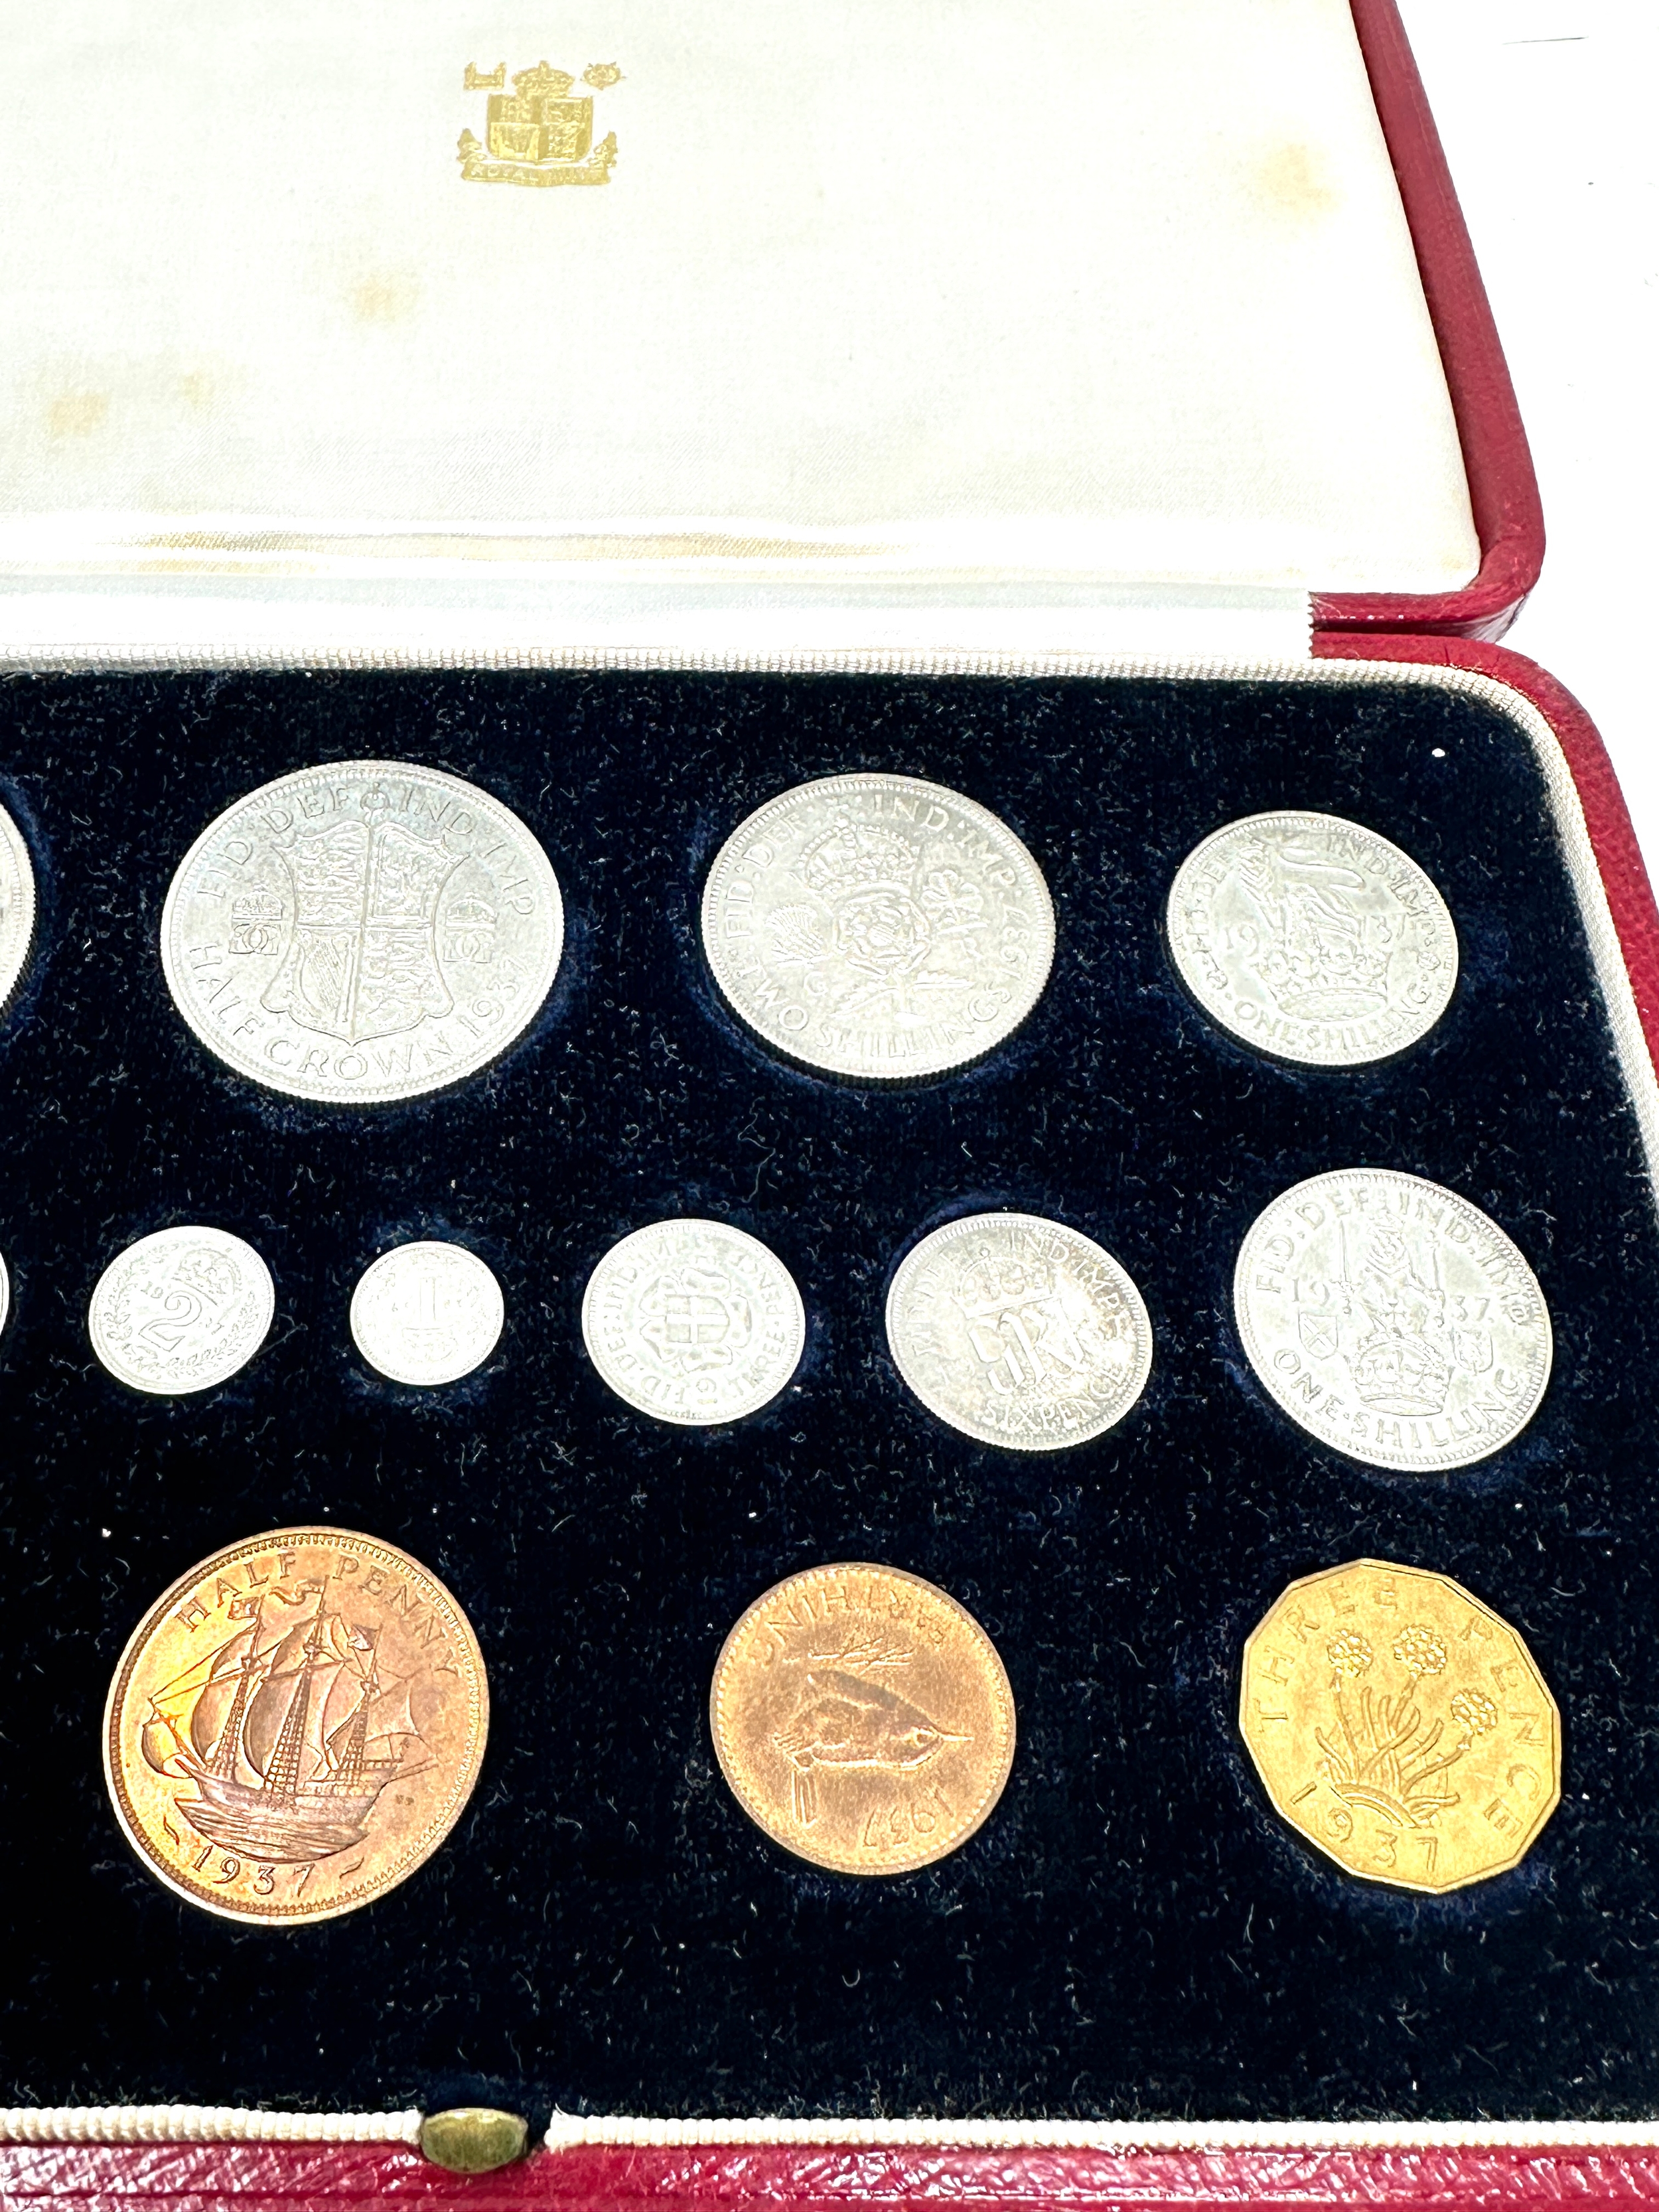 Silver Specimen 1937 15 Coin Set Crown - Farthing & Maundy Money original boxed set in unc condition - Image 3 of 4